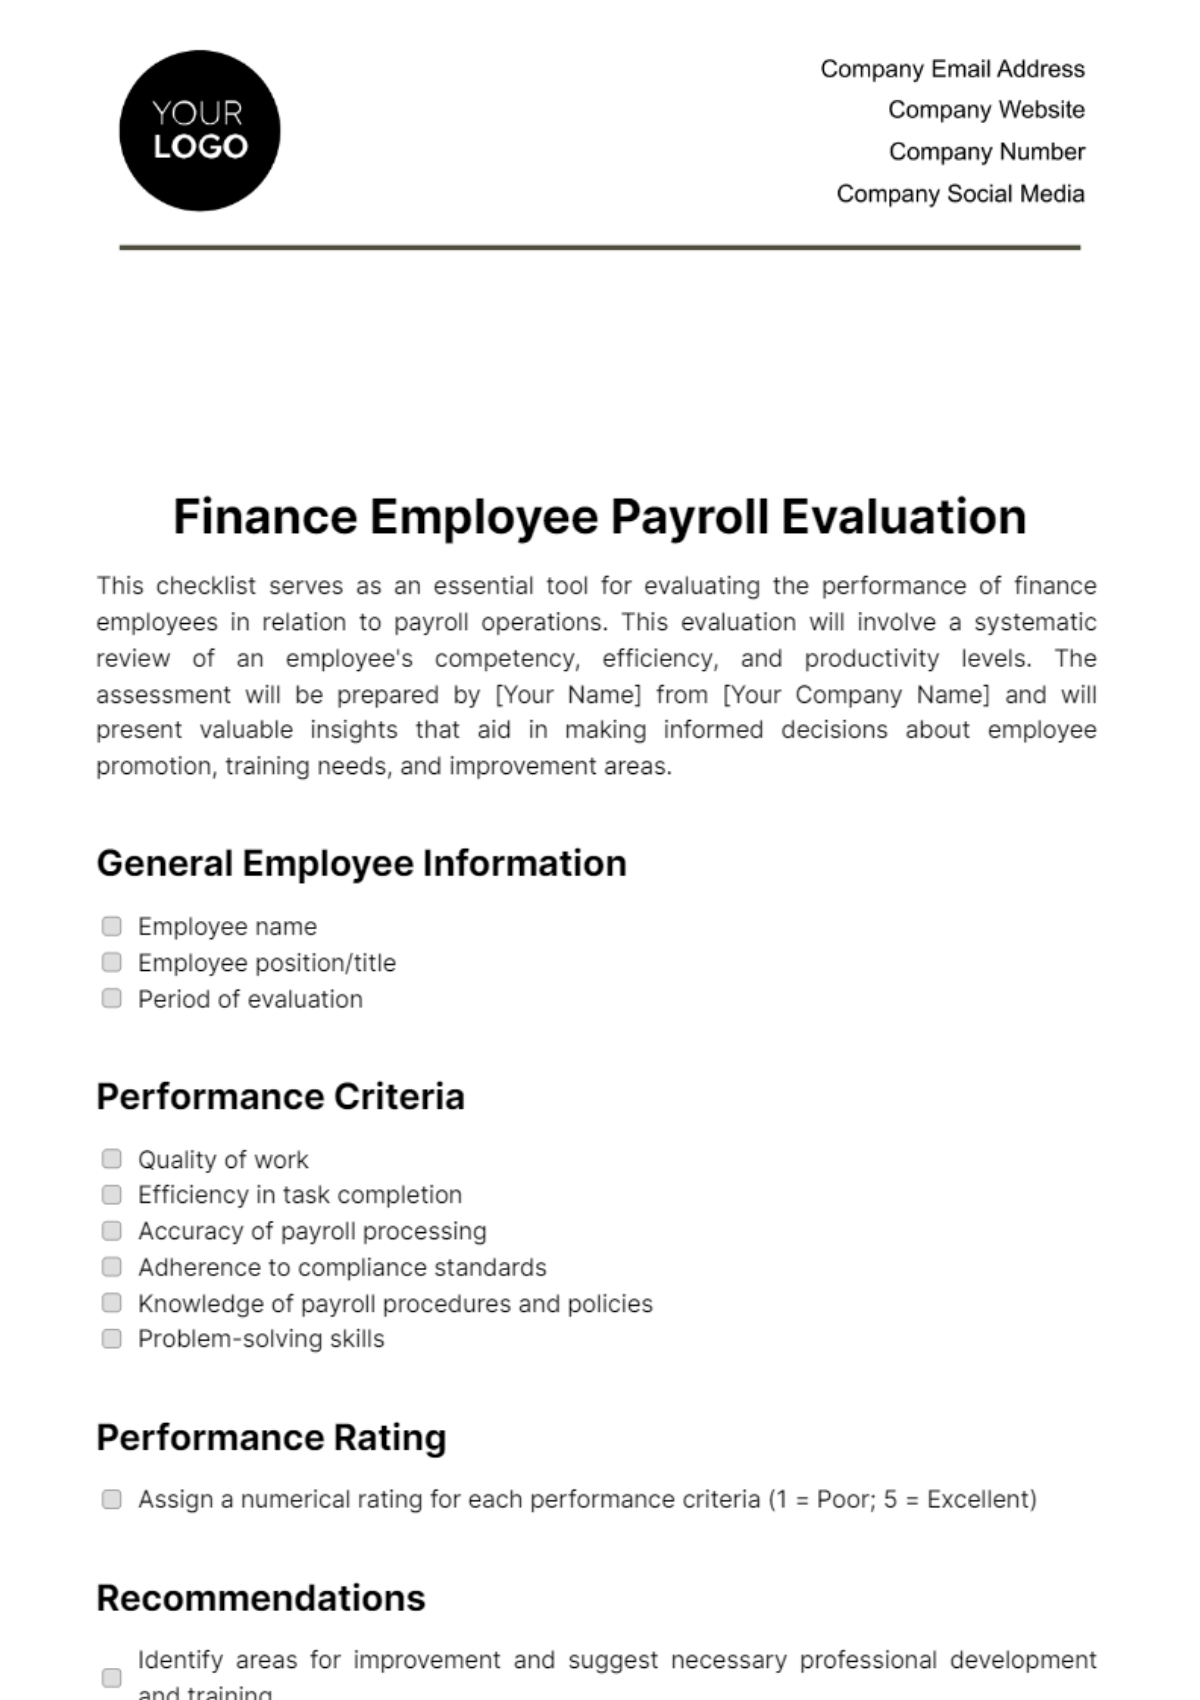 Free Finance Employee Payroll Evaluation Template